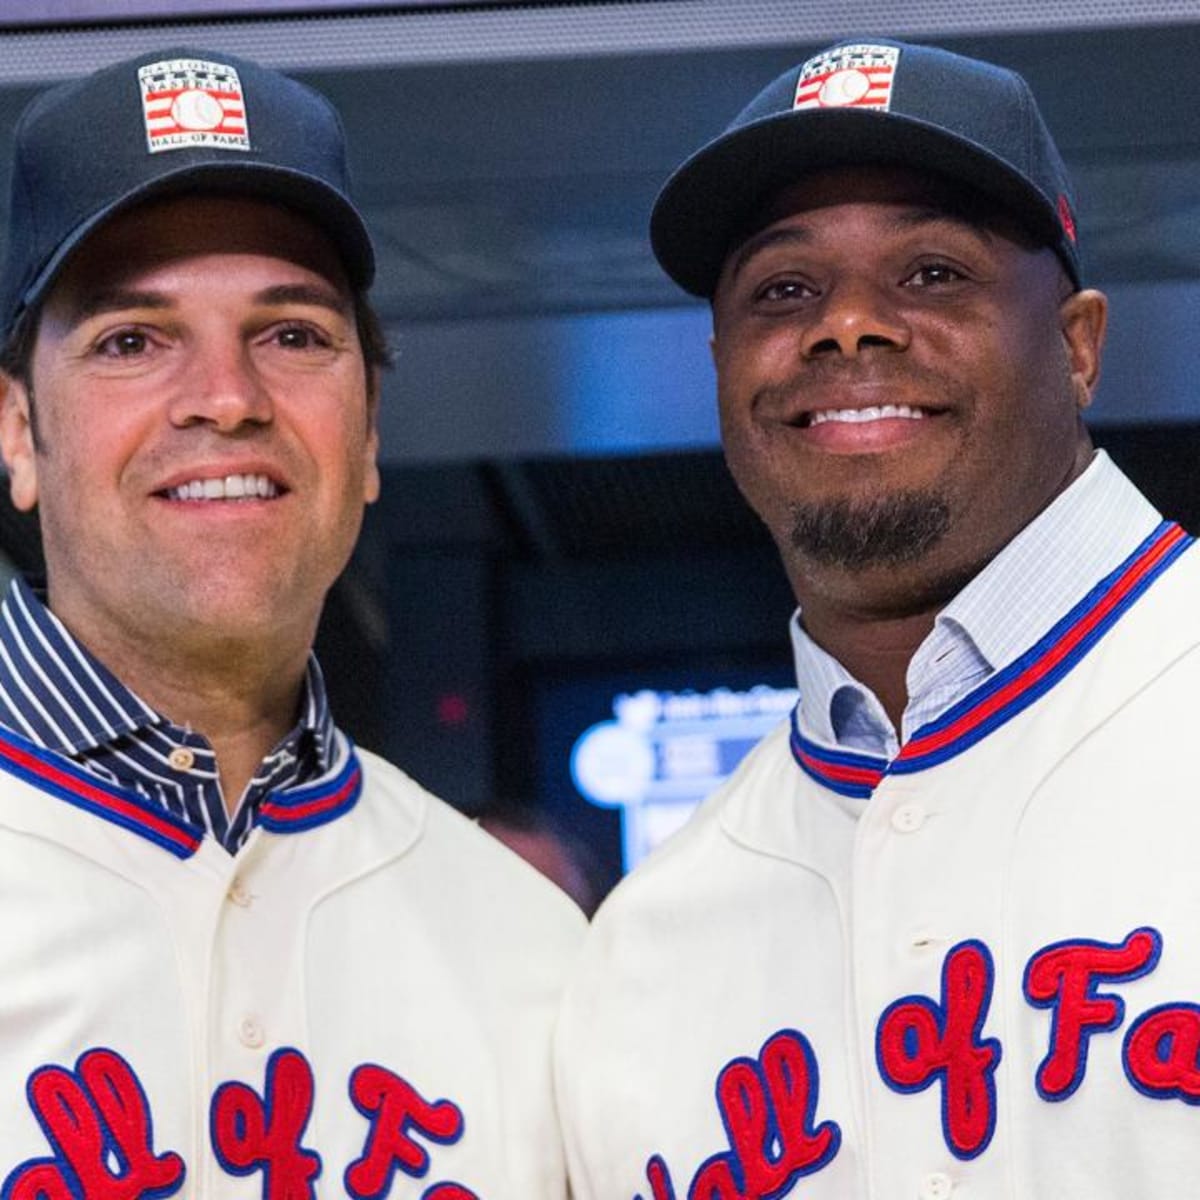 Ken Griffey Jr. and Mike Piazza inducted into Hall of Fame